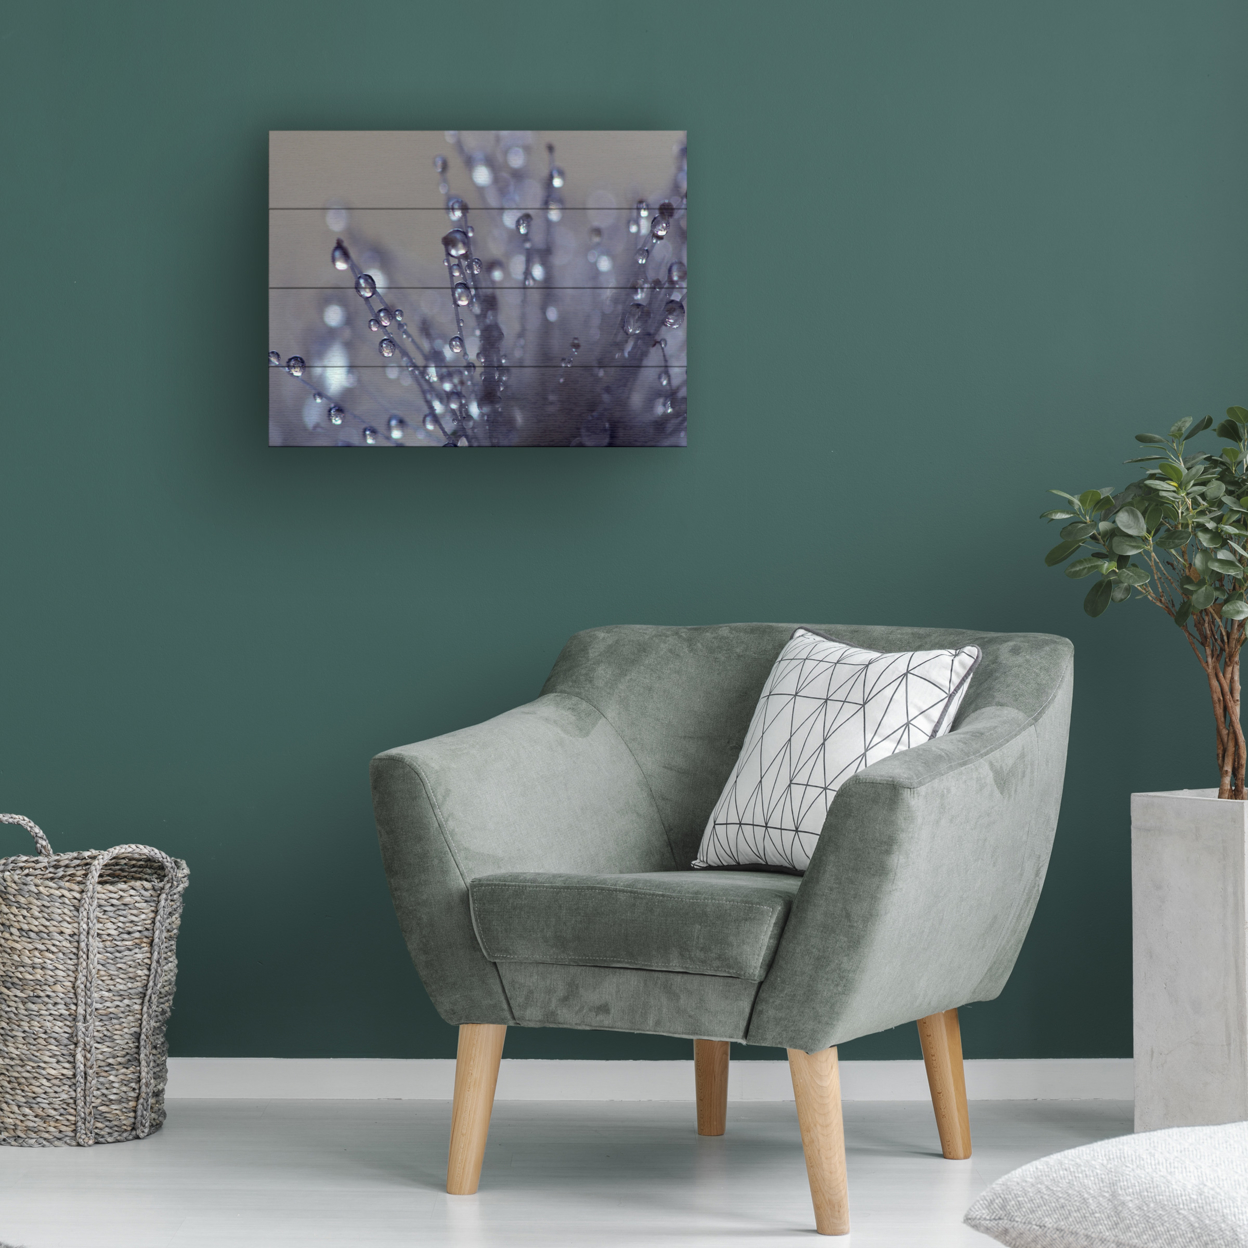 Wall Art 12 X 16 Inches Titled Evening Jewels Ready To Hang Printed On Wooden Planks